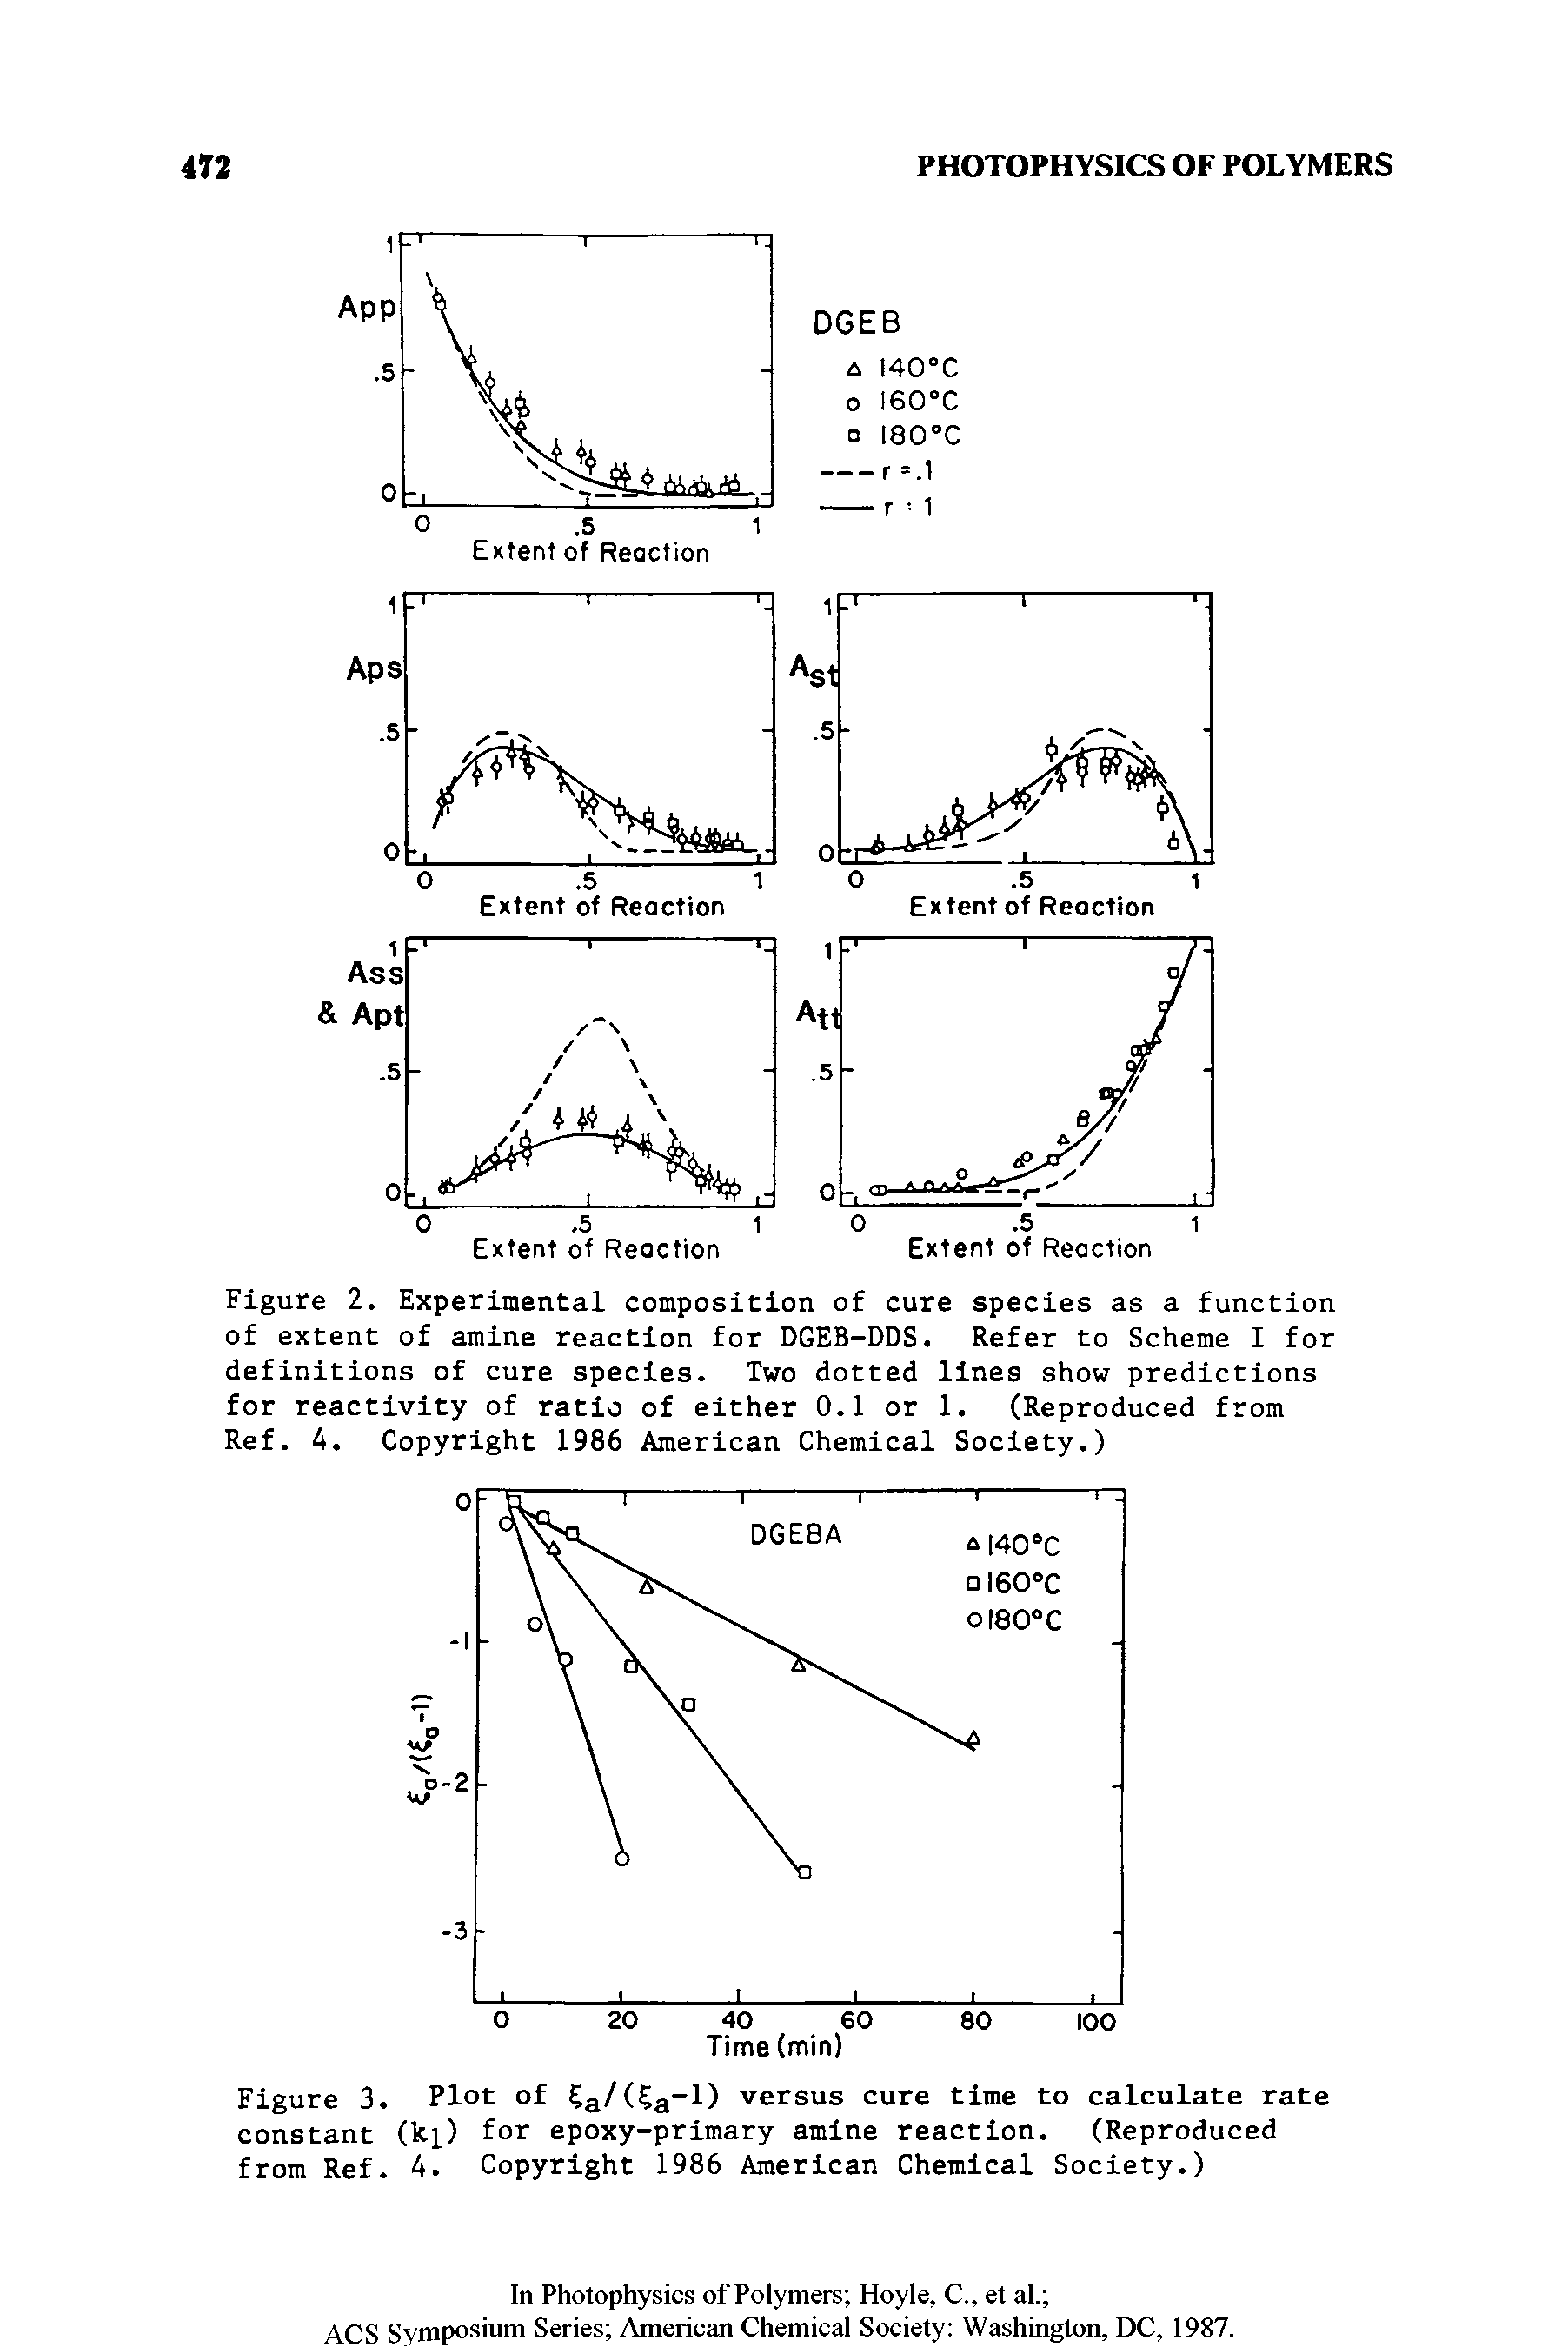 Figure 3. Plot of Ca/(5a l) versus cure time to calculate rate constant (k ) for epoxy-primary amine reaction. (Reproduced from Ref. 4. Copyright 1986 American Chemical Society.)...